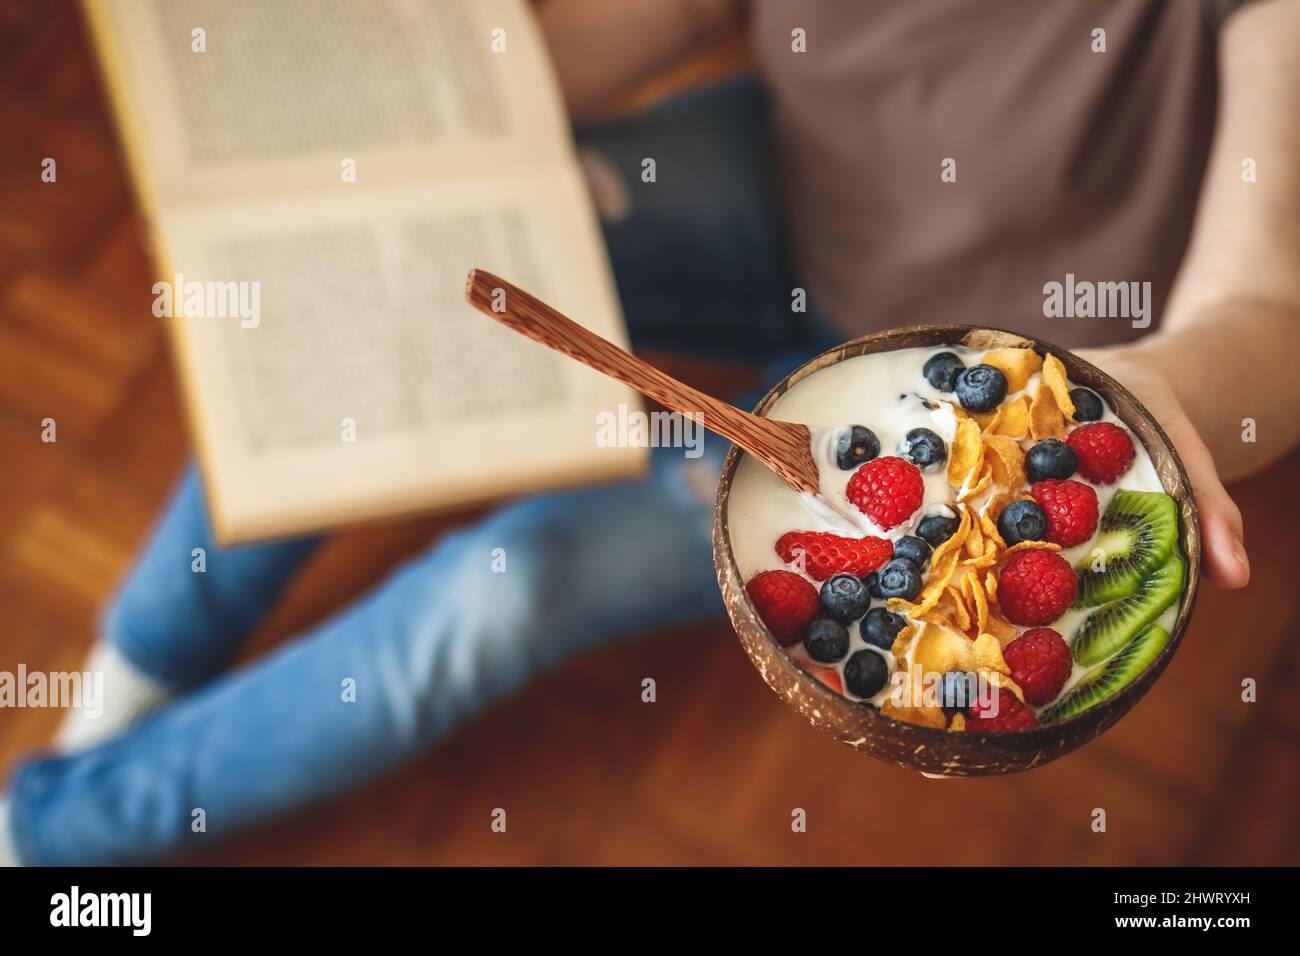 Yogurt, fruit and corn flakes in coconut bowl. Woman reading book during breakfast at home. Healthy eating and lifestyle Stock Photo